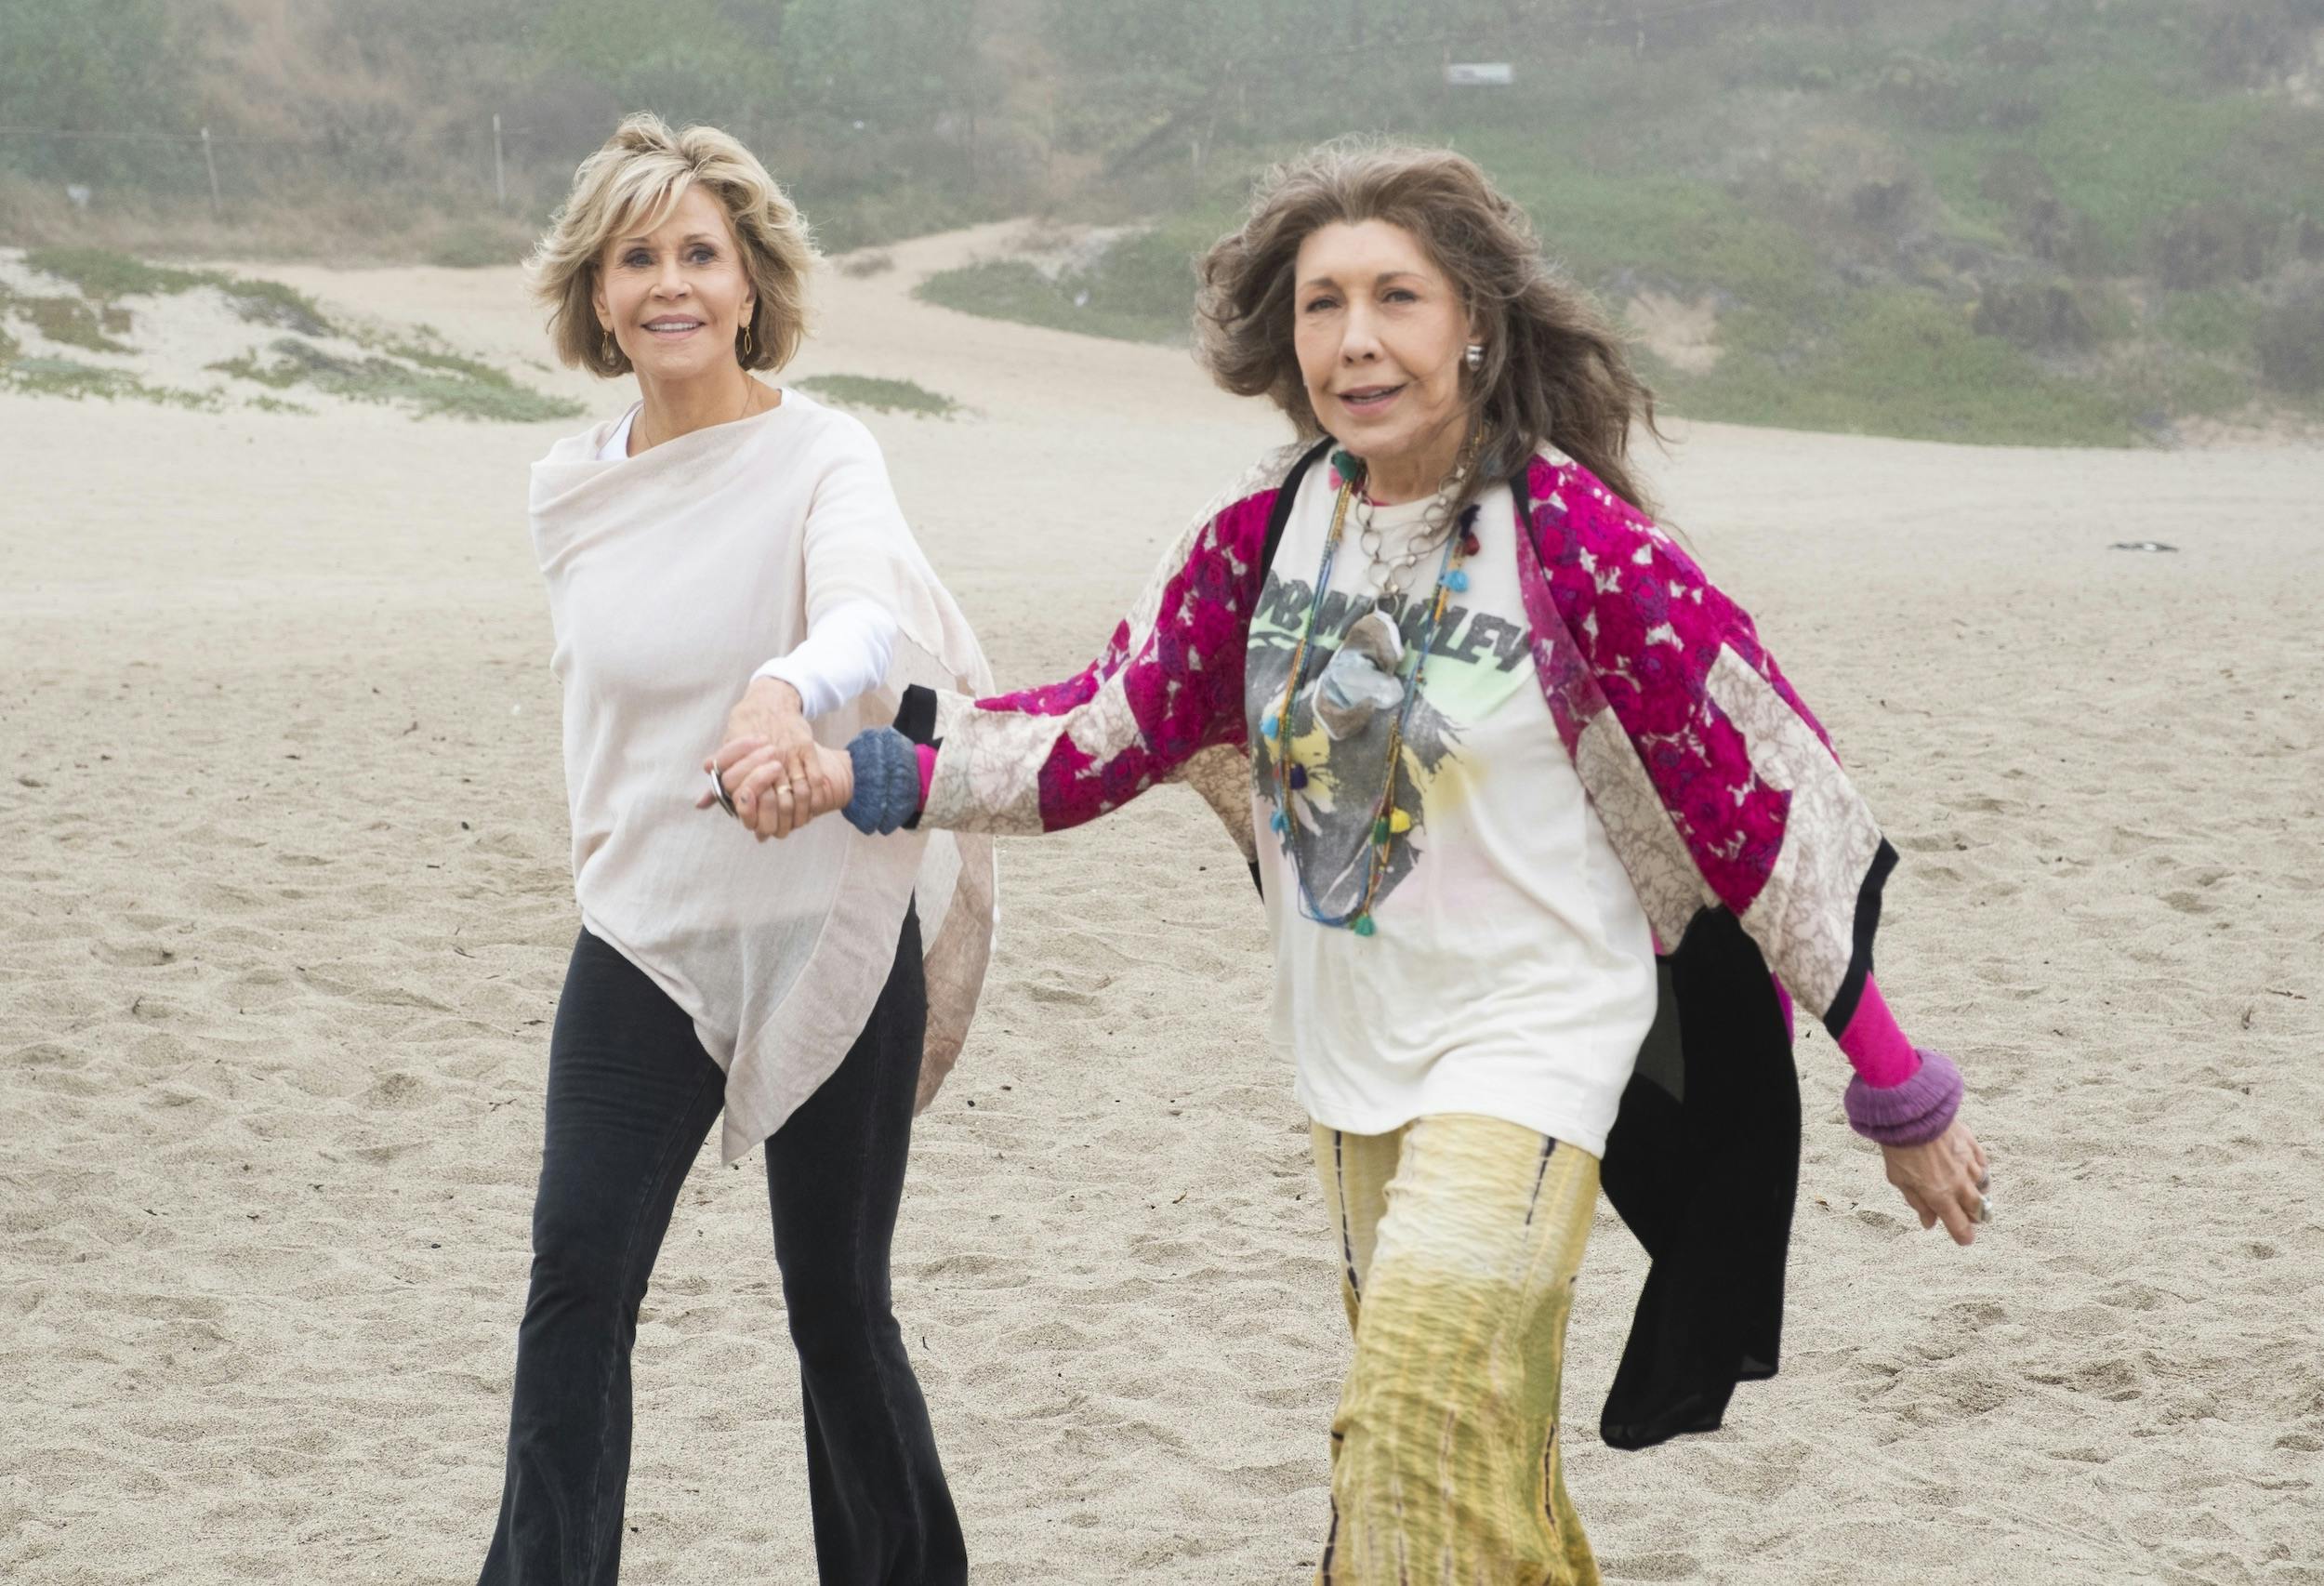 Grace and Frankie walk on a beach holding hands. Grace wears dark pants and a tan poncho. Frankie wears yellow pants, a white graphic tee, necklaces, and a pink wrap. They look happy in this foggy scene.